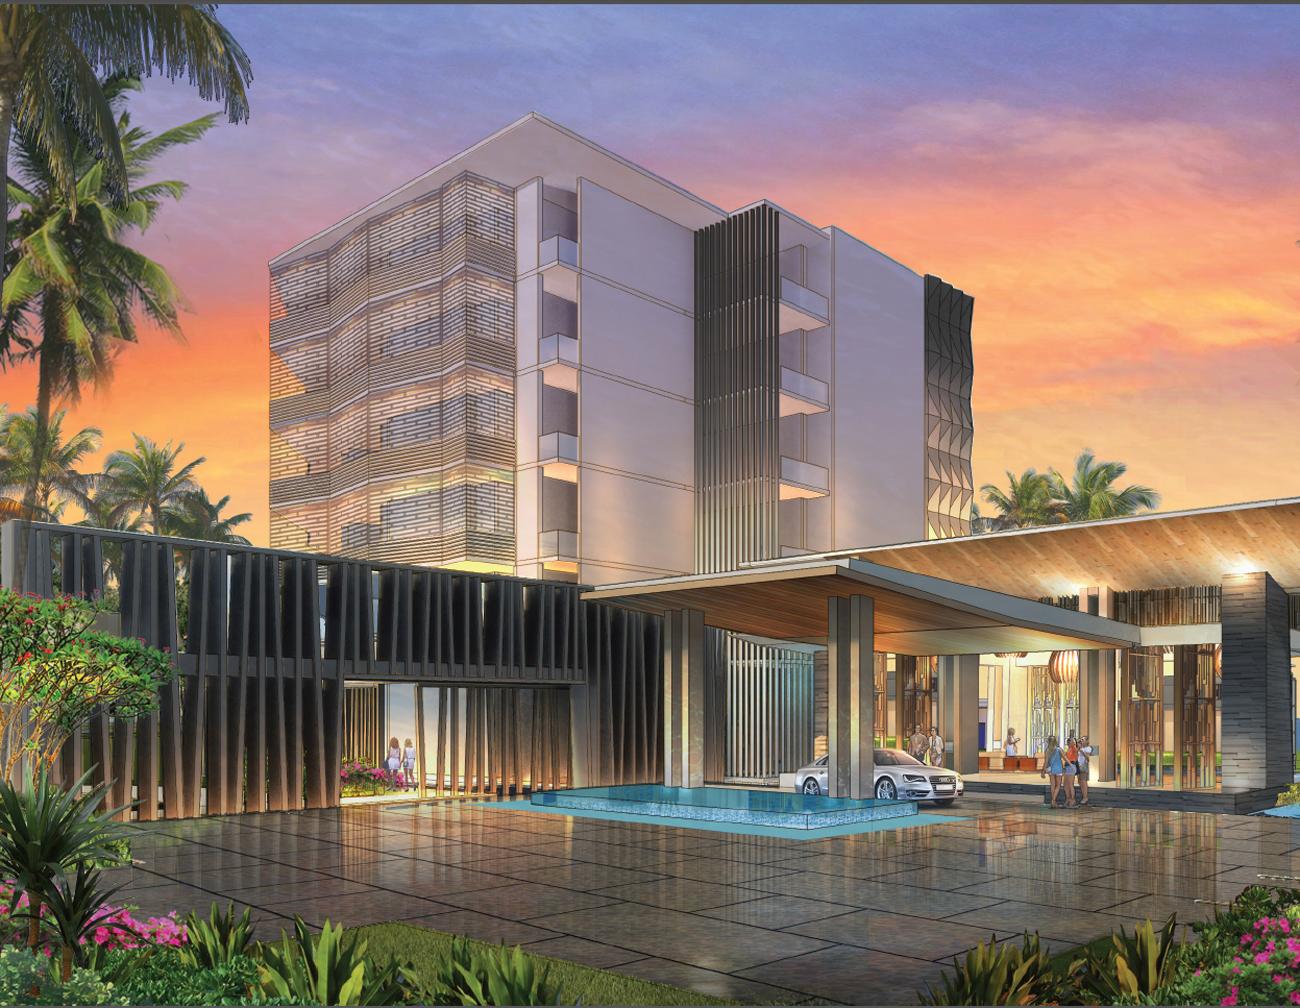 Waldorf Astoria Cancun is being developed by leisure specialist Parks Hospitality and designed by SB Architects, EDSA and HBA / Hilton Hotels